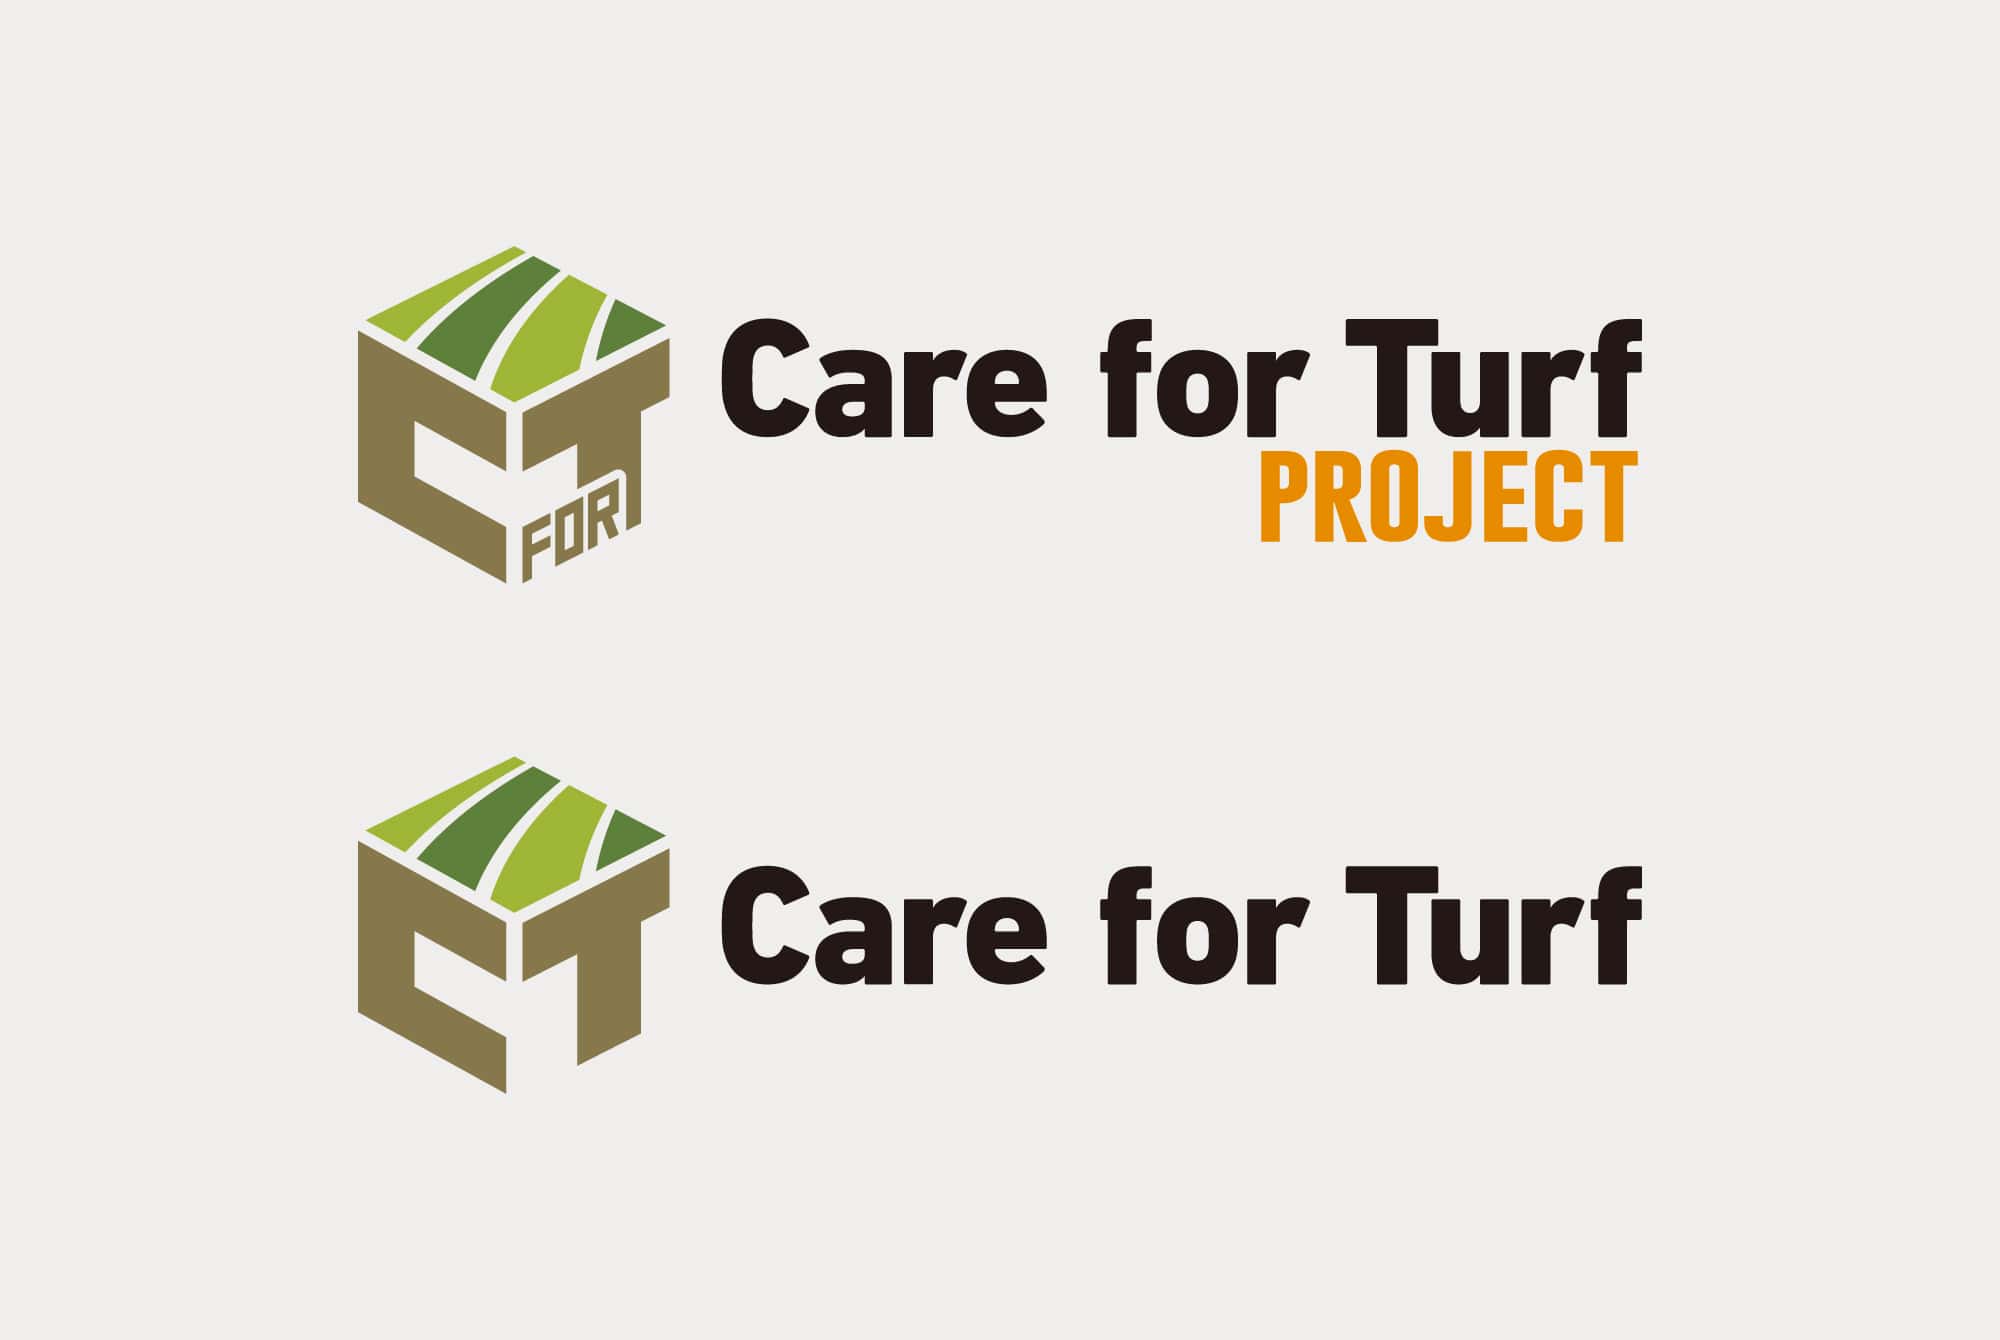 Care for Turf